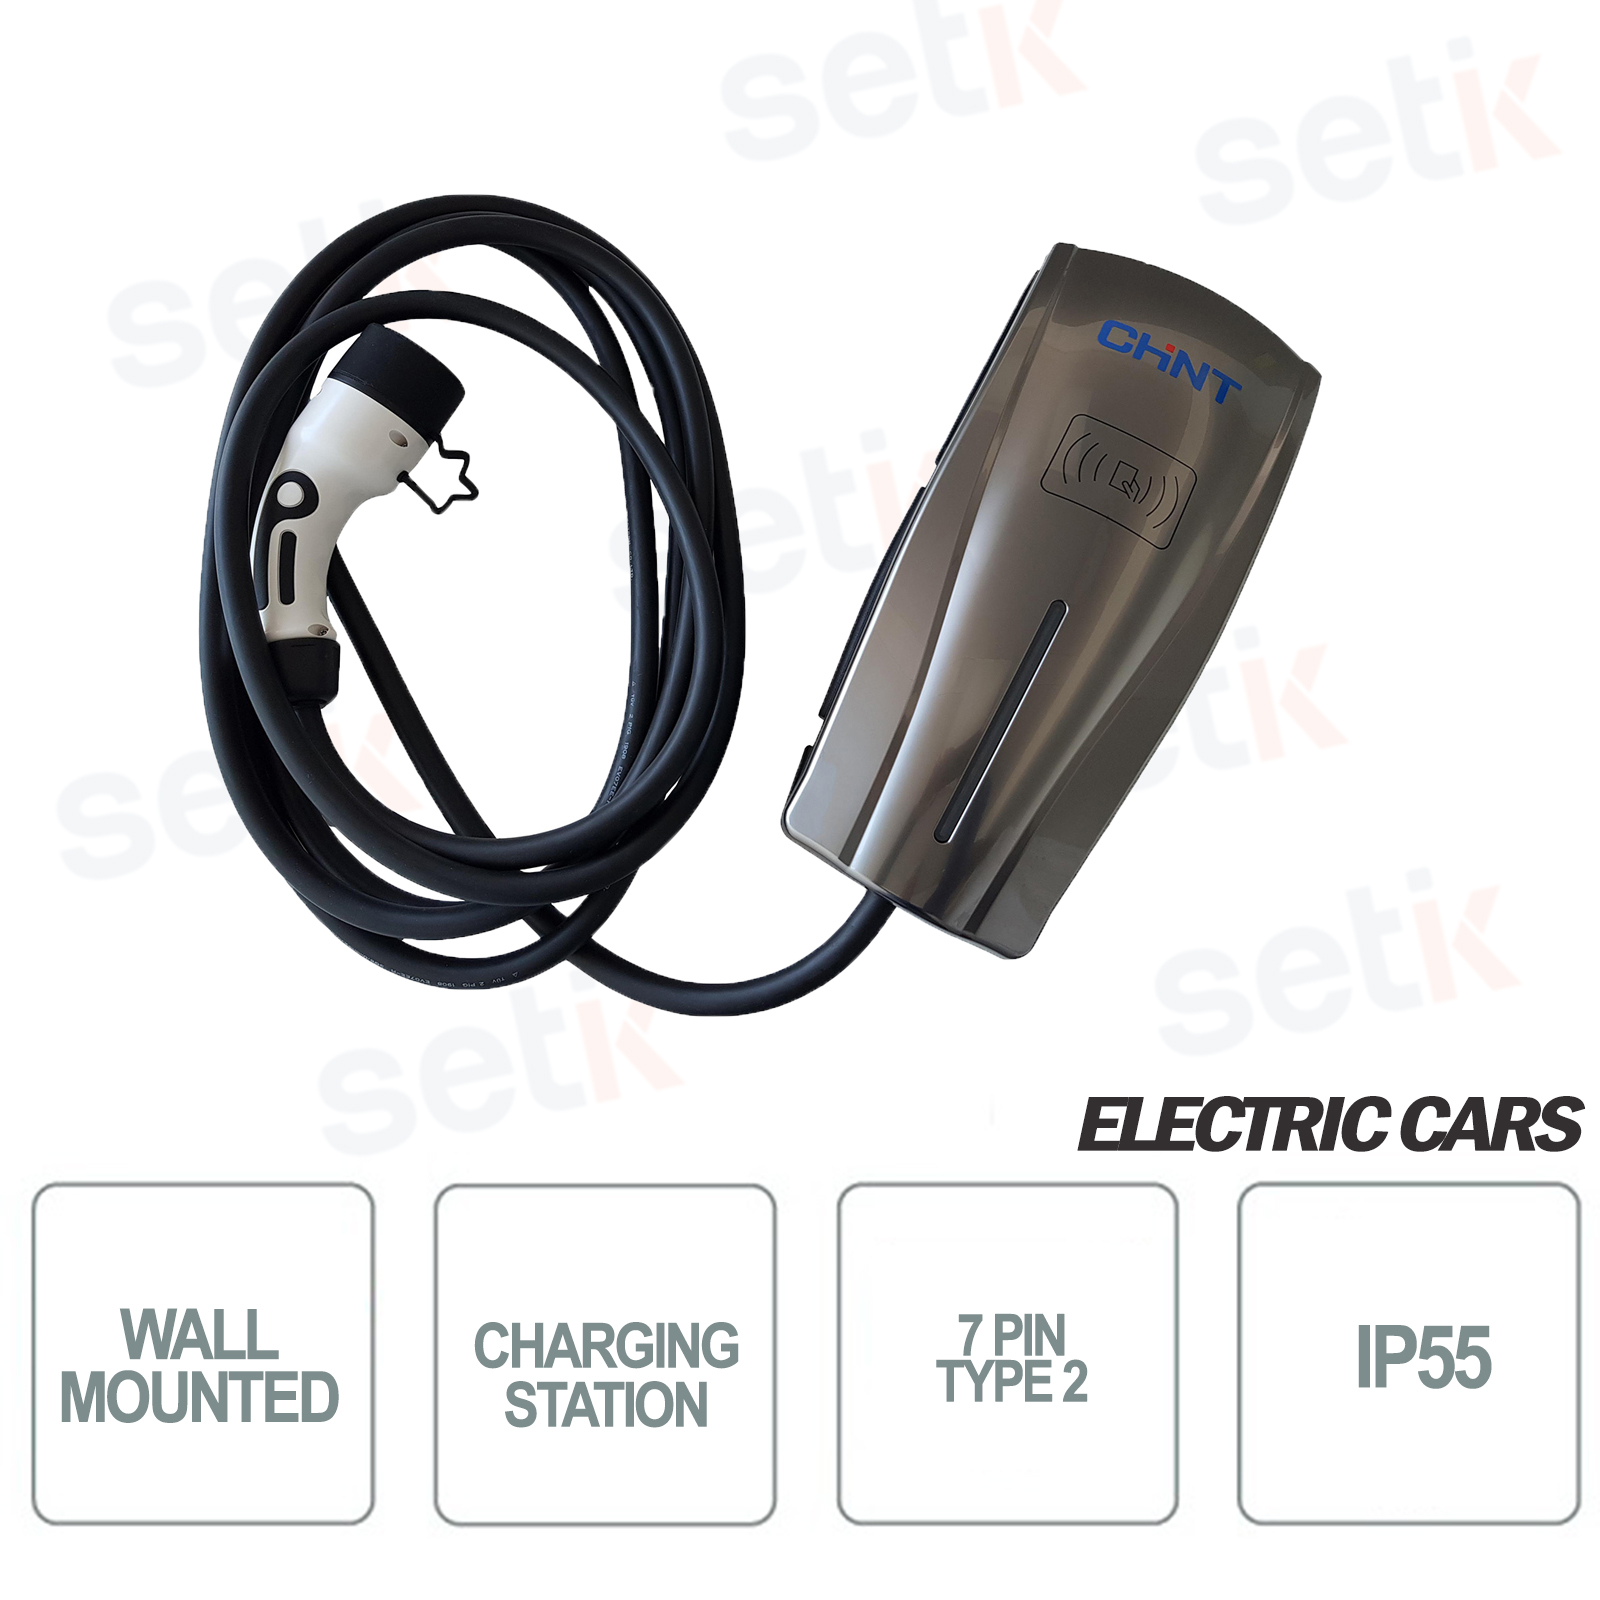 7kW charging stations for electric cars